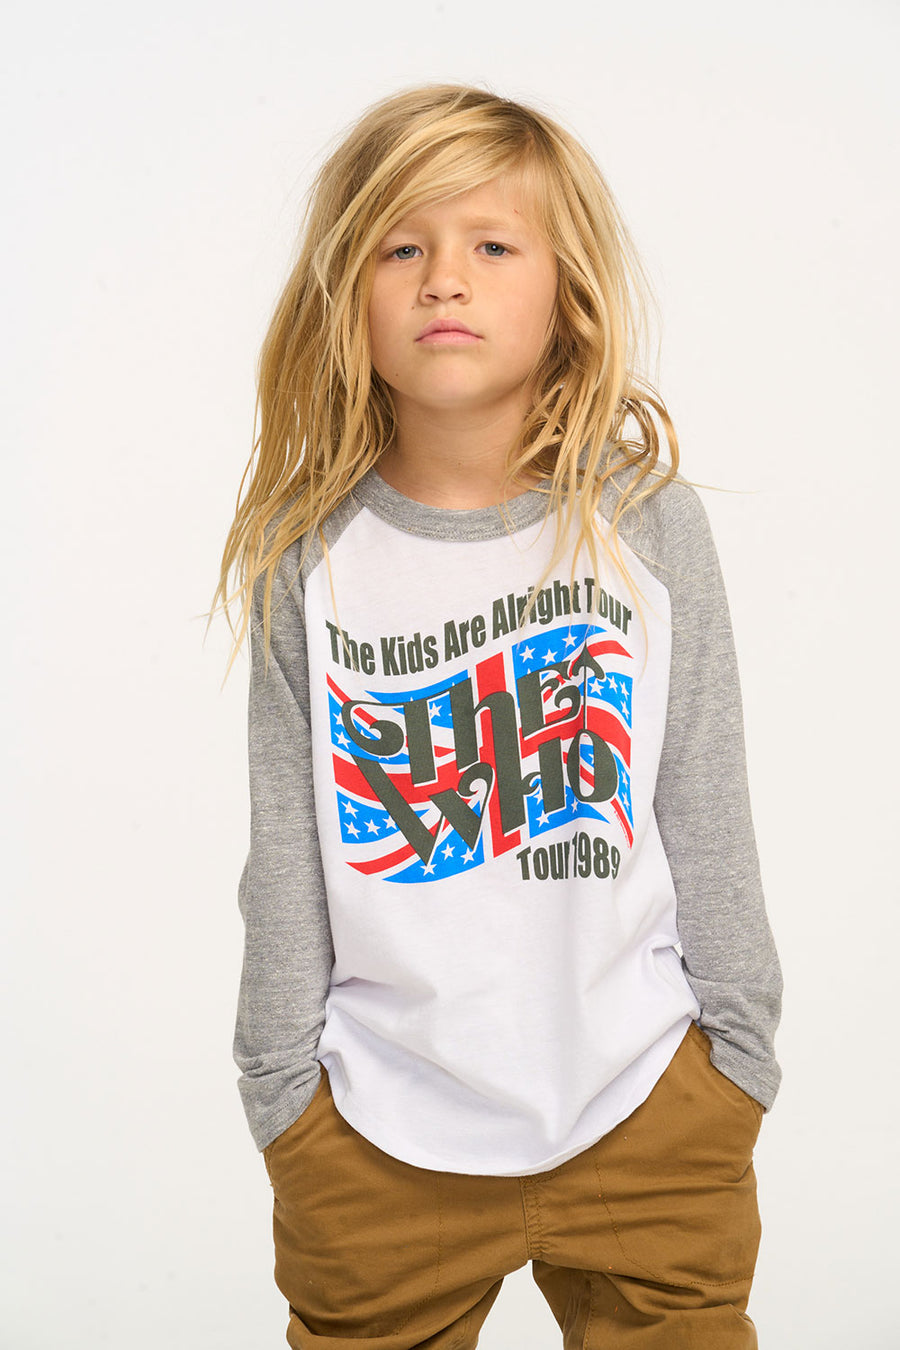 The Who The Kids Are Alright Tour Baseball Tee BOYS chaserbrand